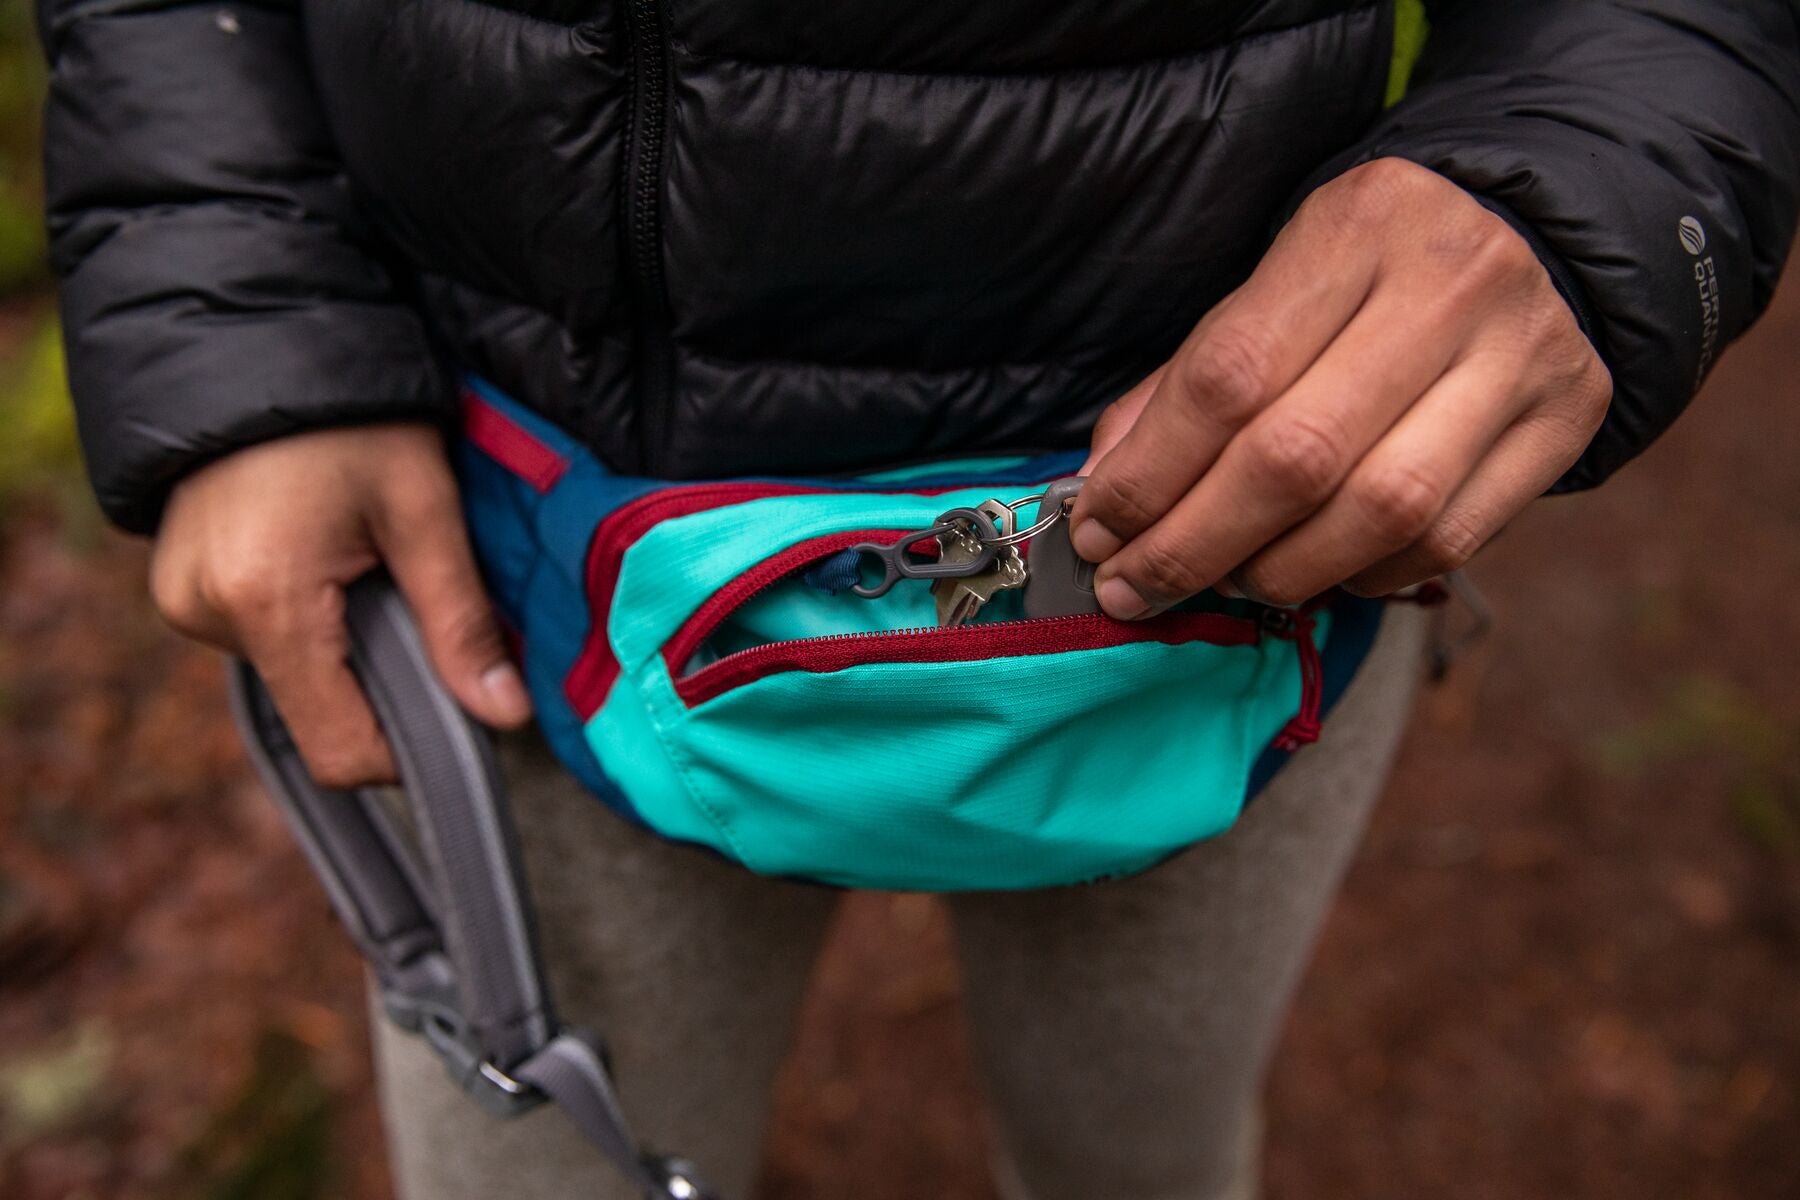 A woman wears the Ruffwear Home Trail™ Hip Pack around her waist and puts her keys in it.